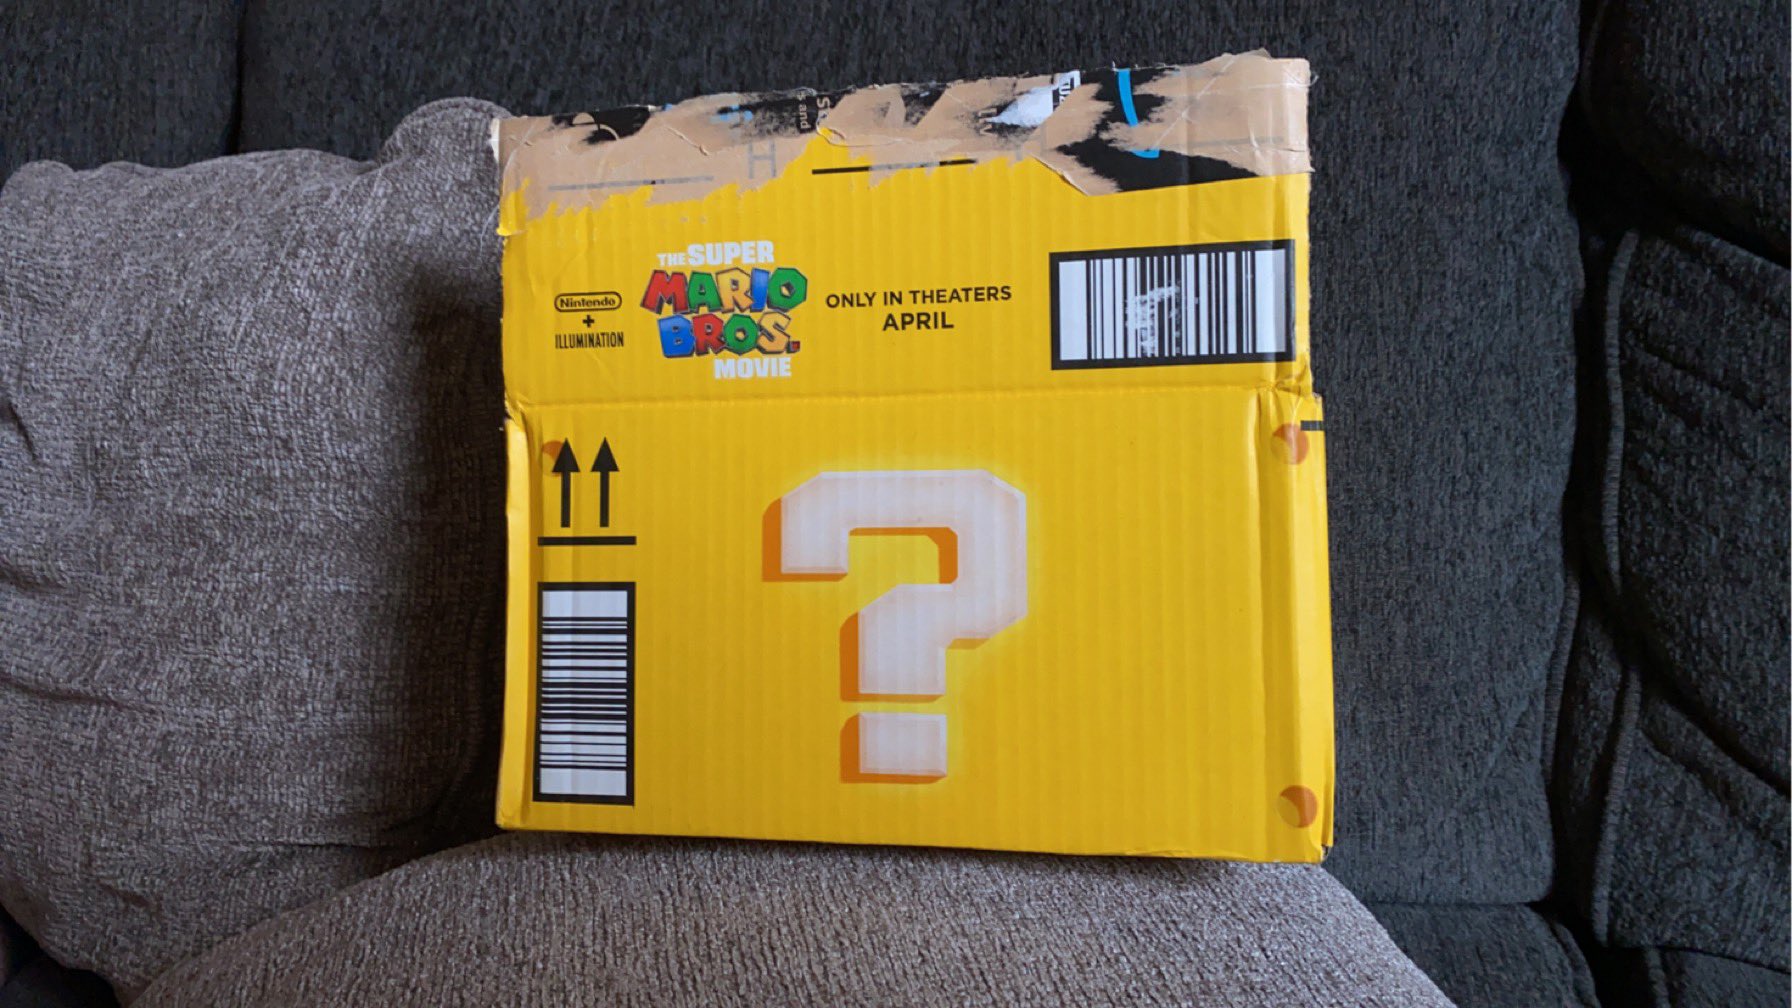 Amazon is turning its boxes into question mark blocks to promote the Mario movie